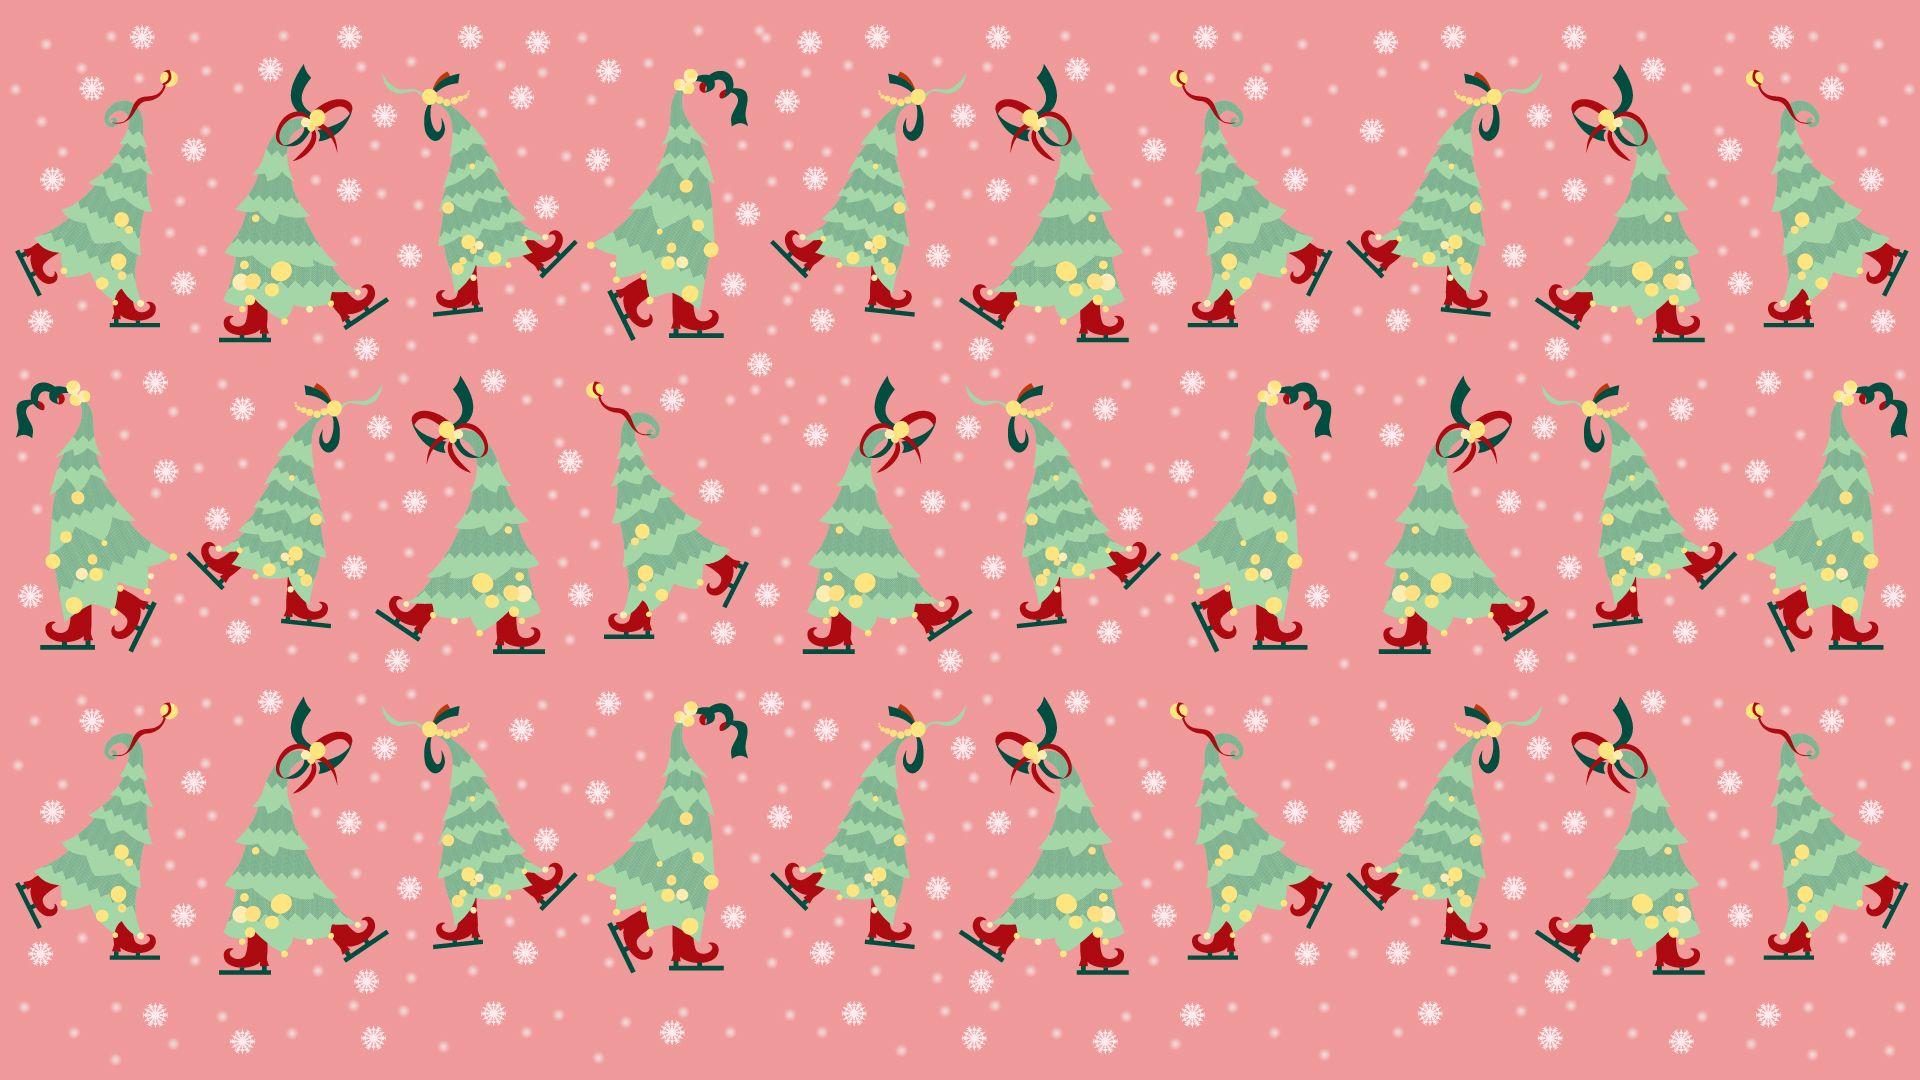 5 Free Festive Christmas Wallpapers for Laptops and Devices